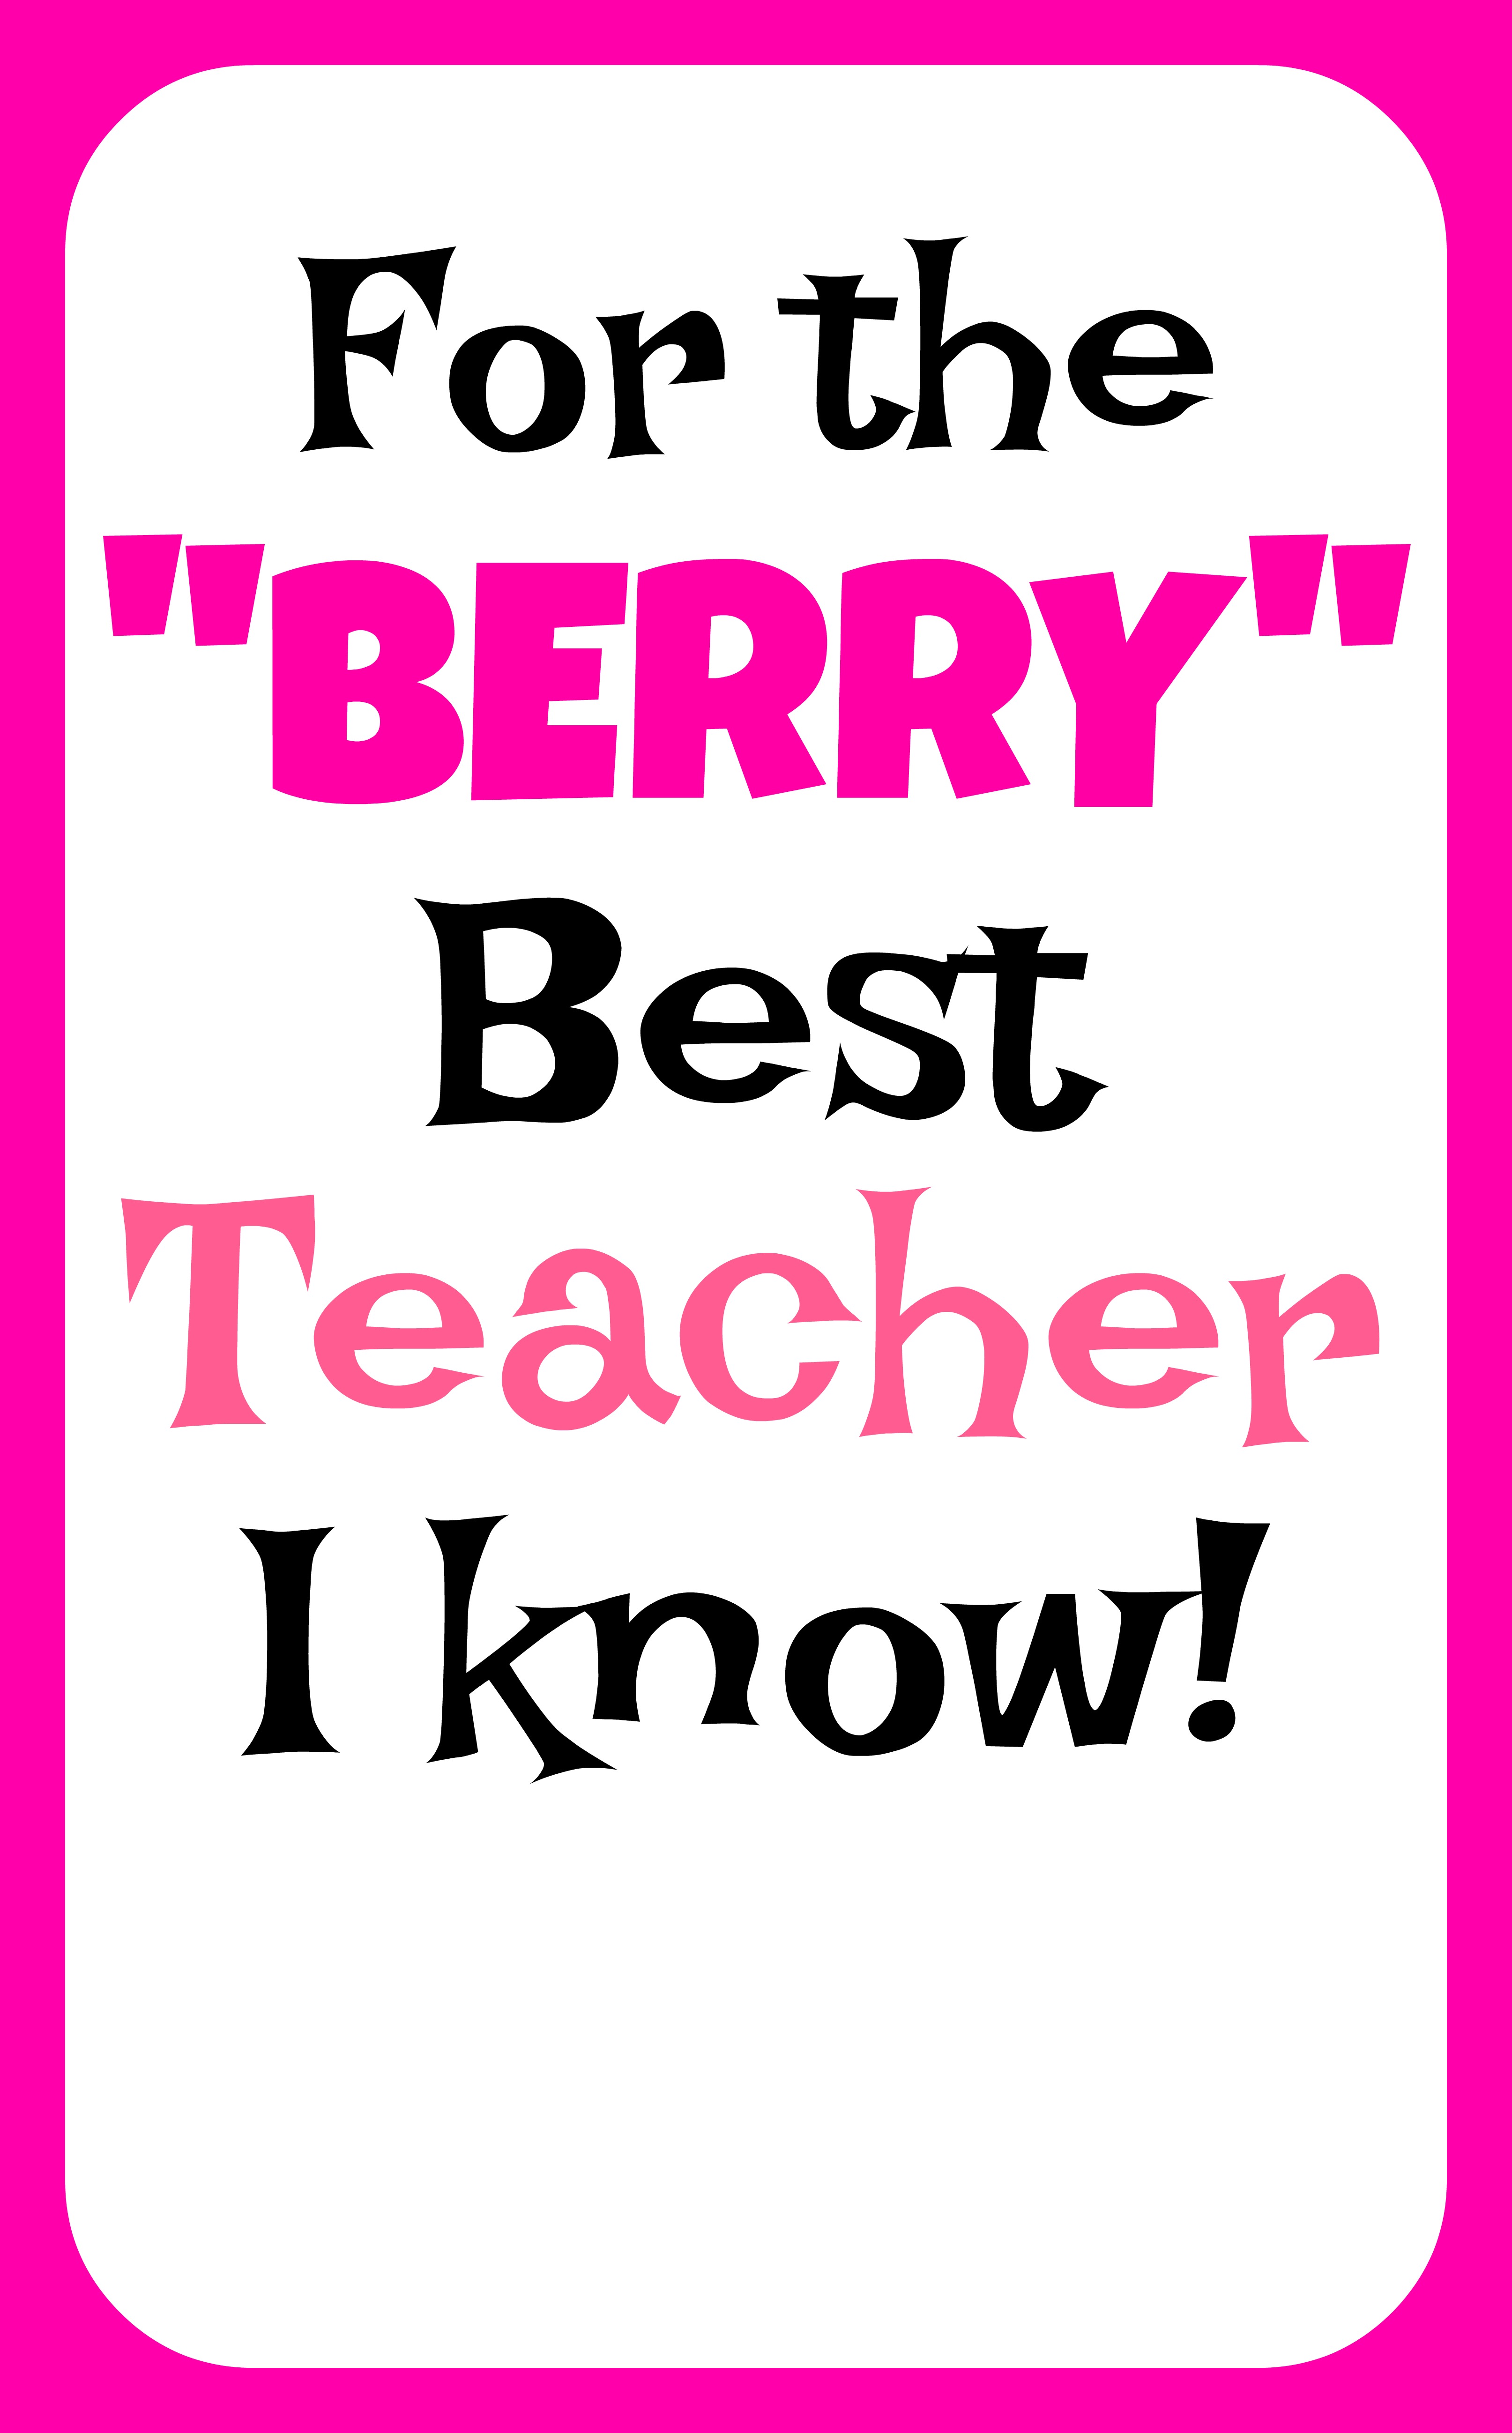 Super Cute 'Berry' Best Teacher Gift Idea and FREE Printable Smashed